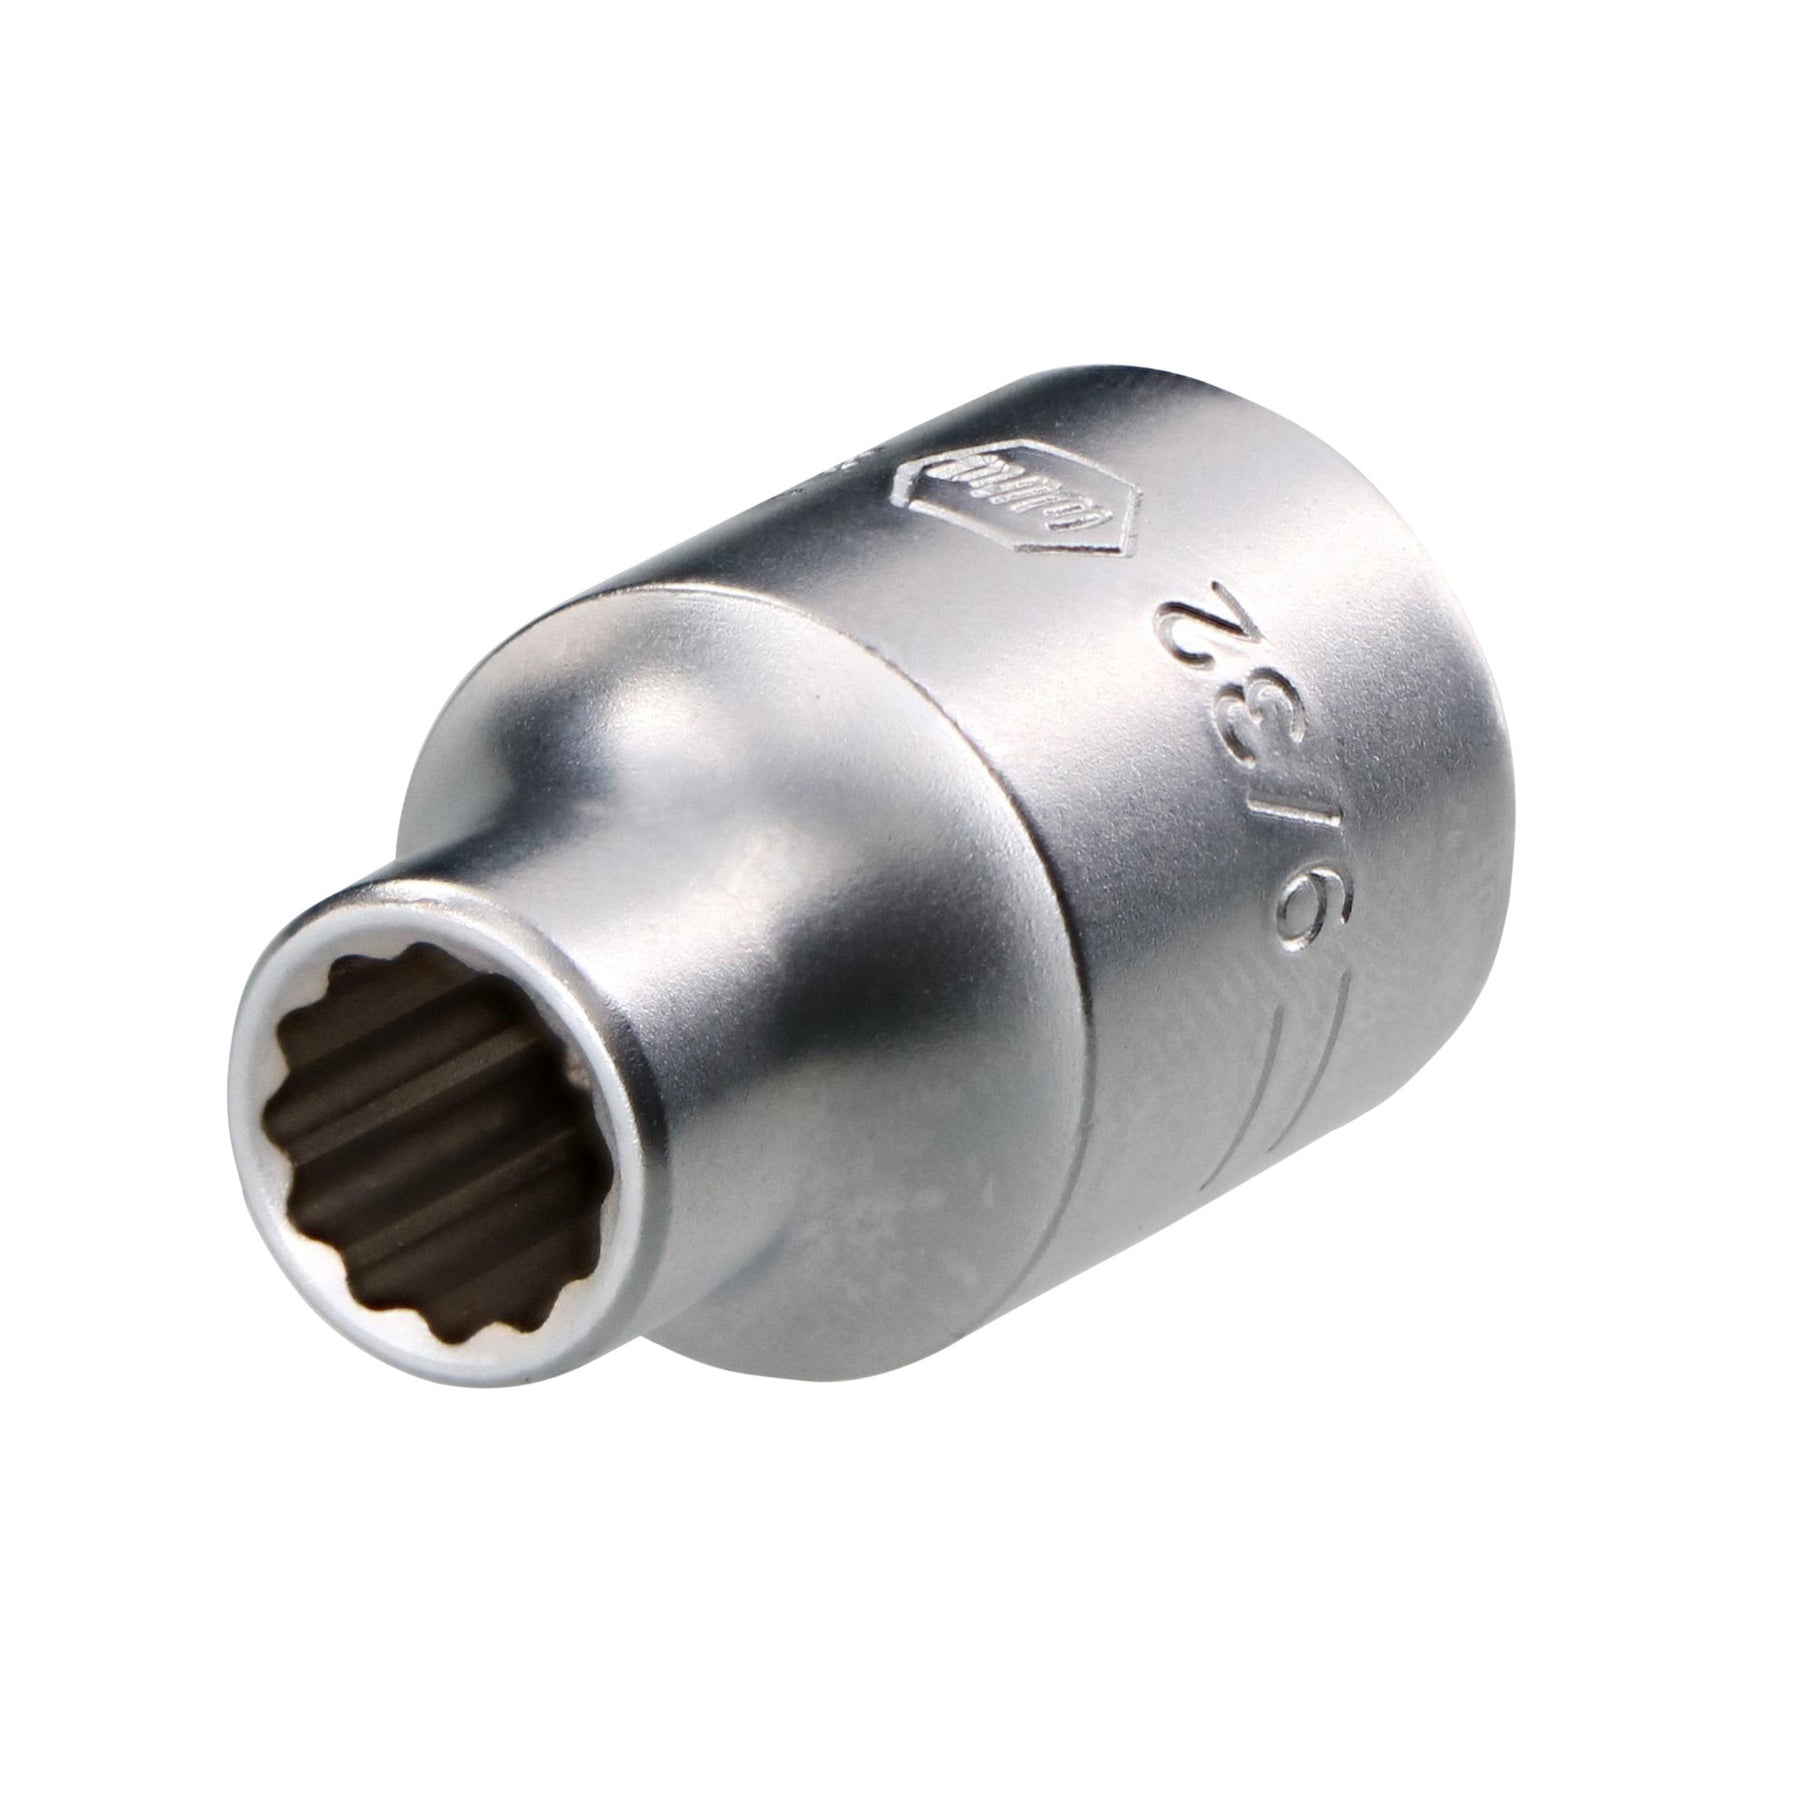 12 Point - 3/8 Inch Drive Socket - 9/32"